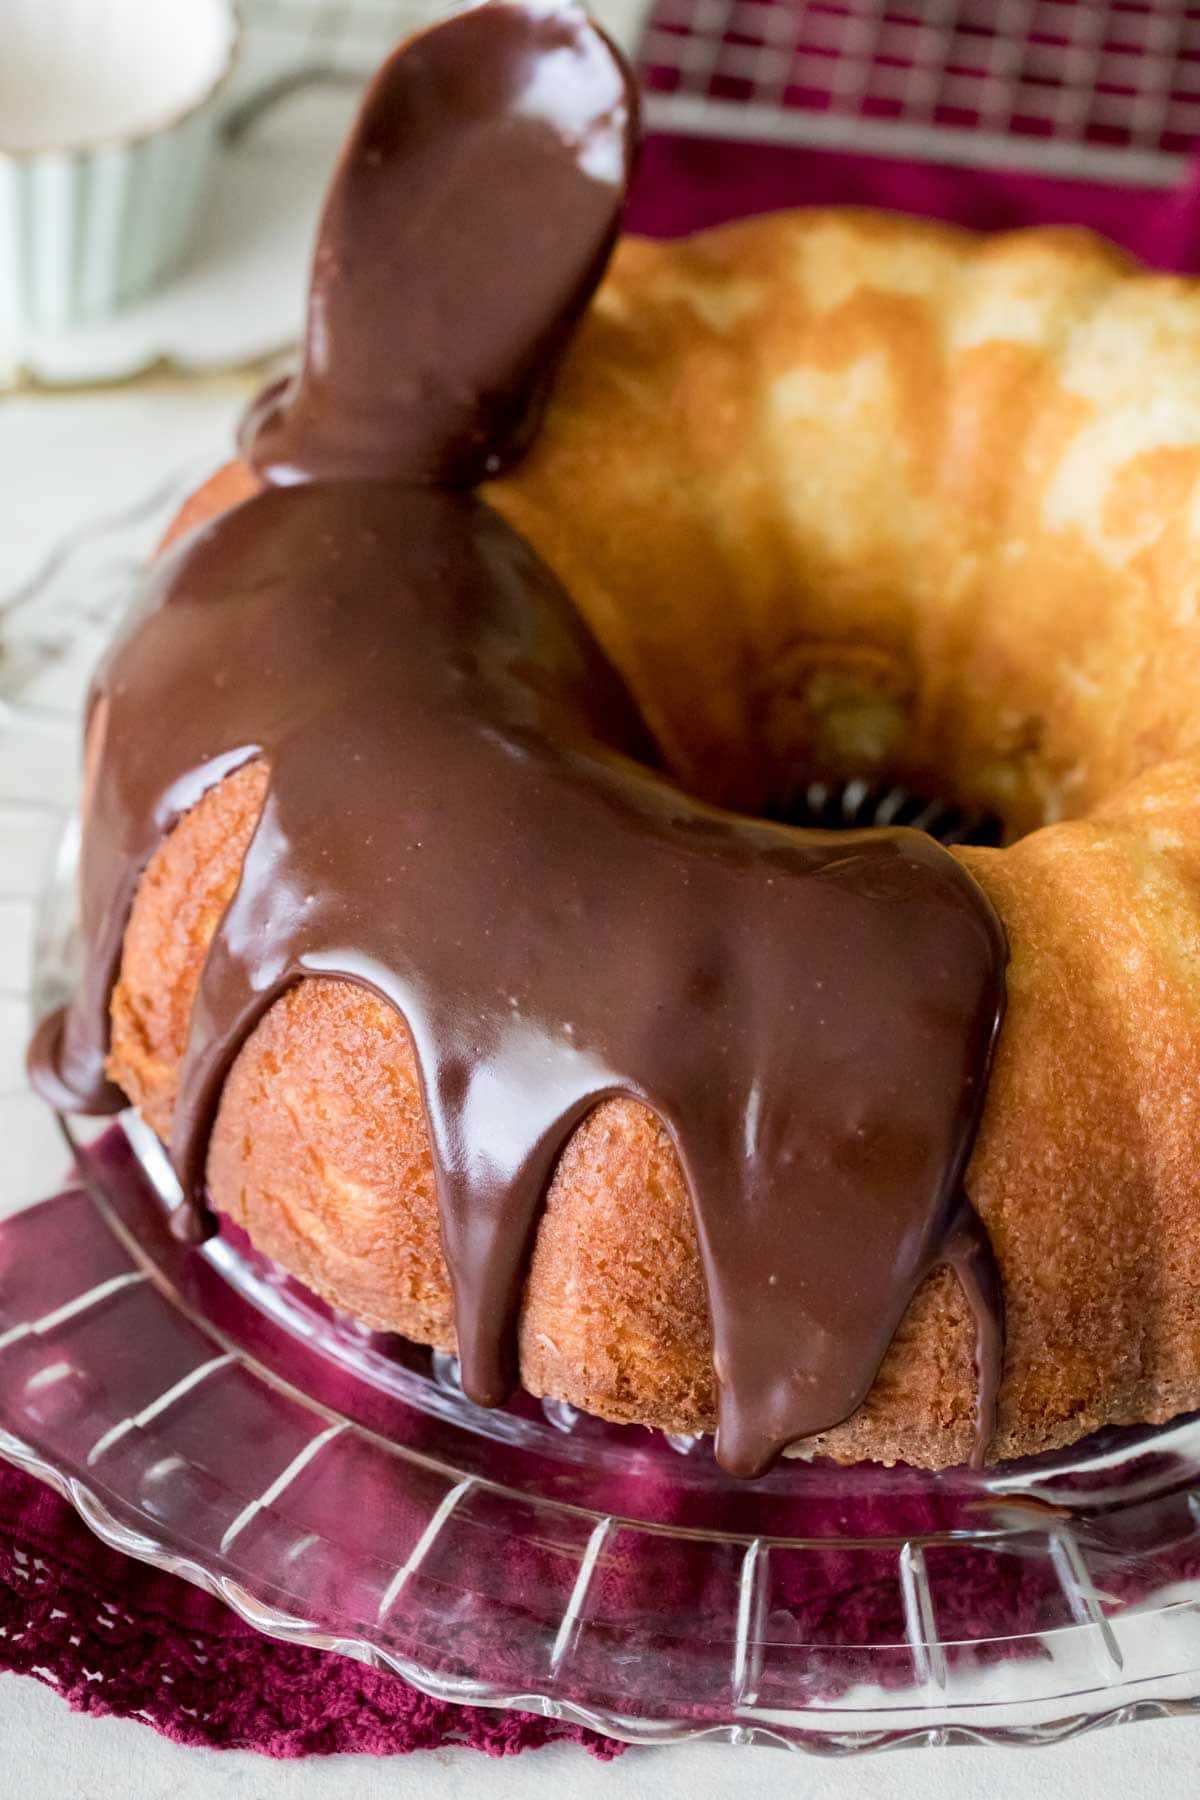 chocolate fudge frosting being poured onto a golden brown bundt cake